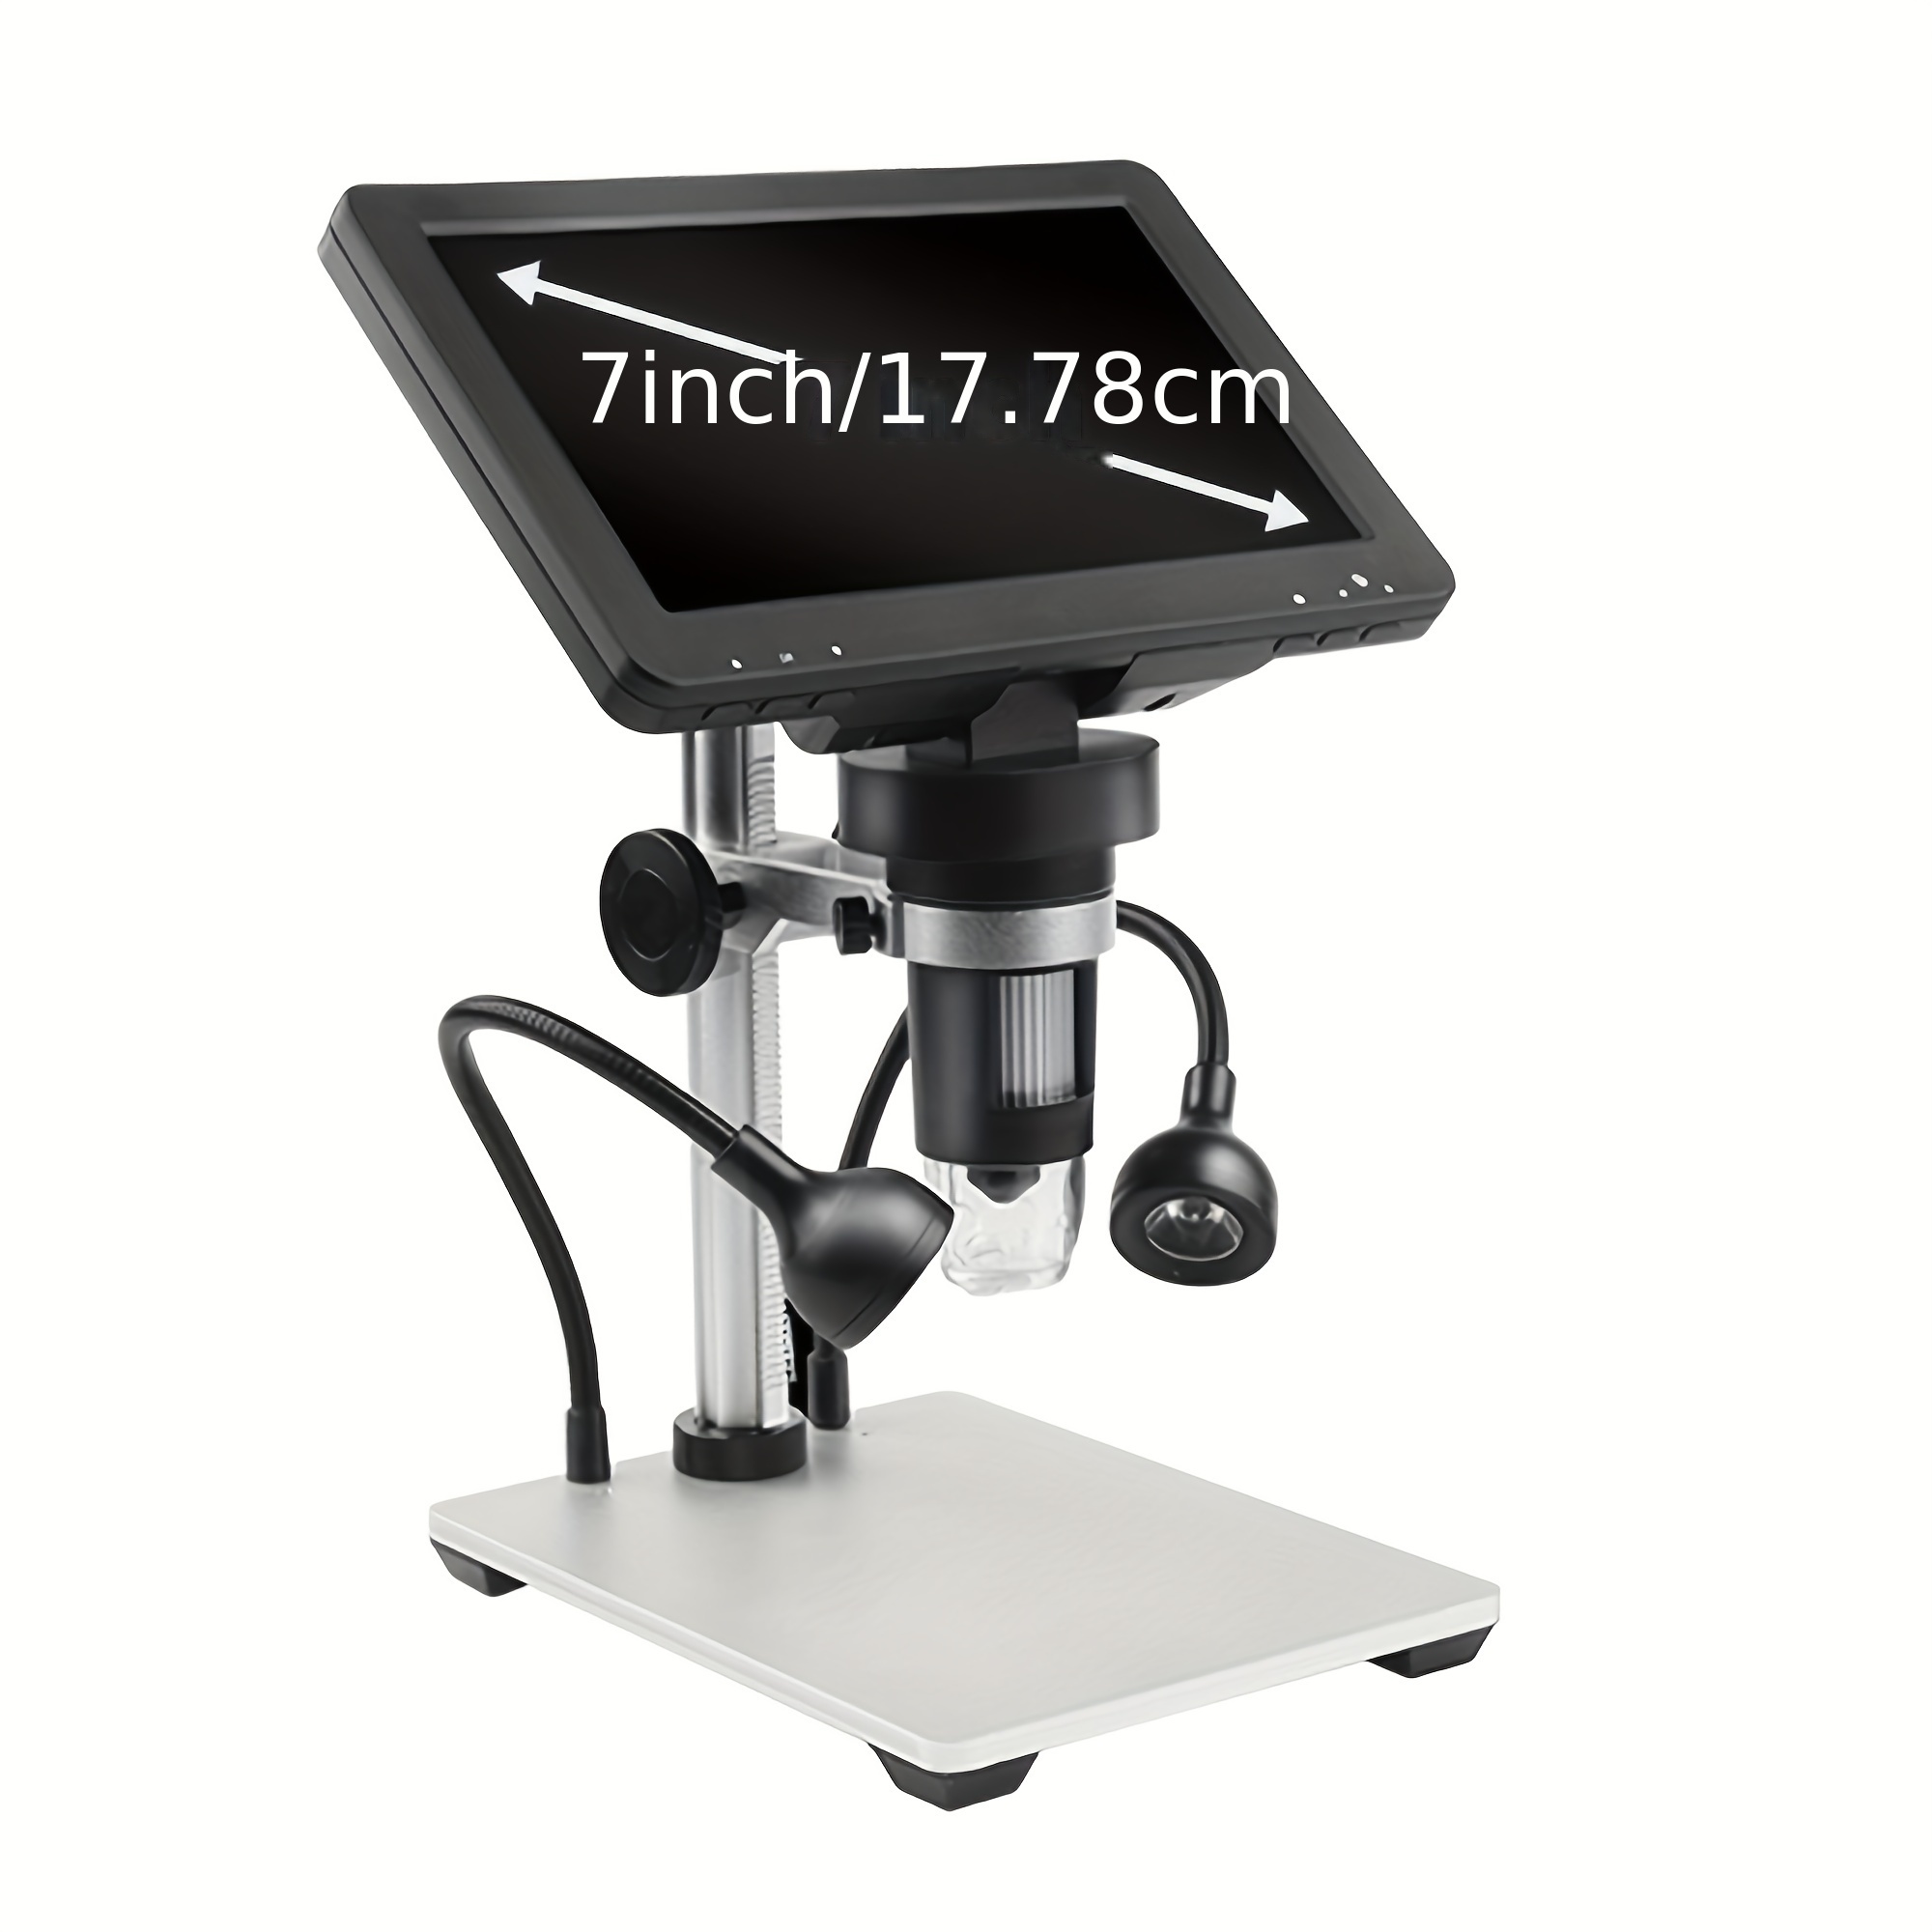 7 HD LCD Digital Microscope - 1200X Zoom, 1080P Clarity, 12MP Images, Metal Stand